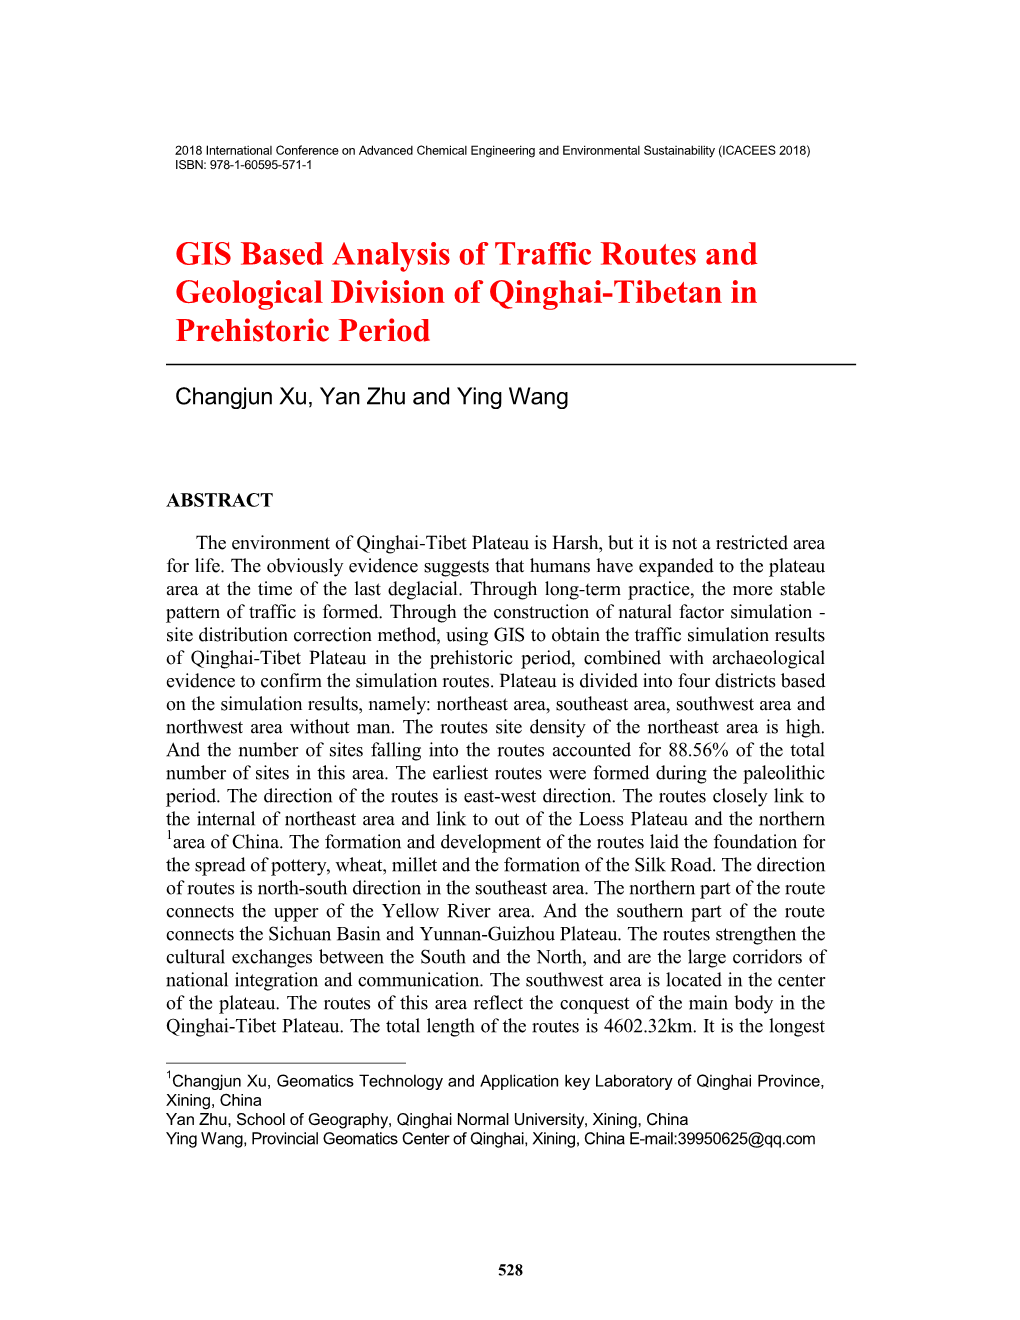 GIS Based Analysis of Traffic Routes and Geological Division of Qinghai-Tibetan In